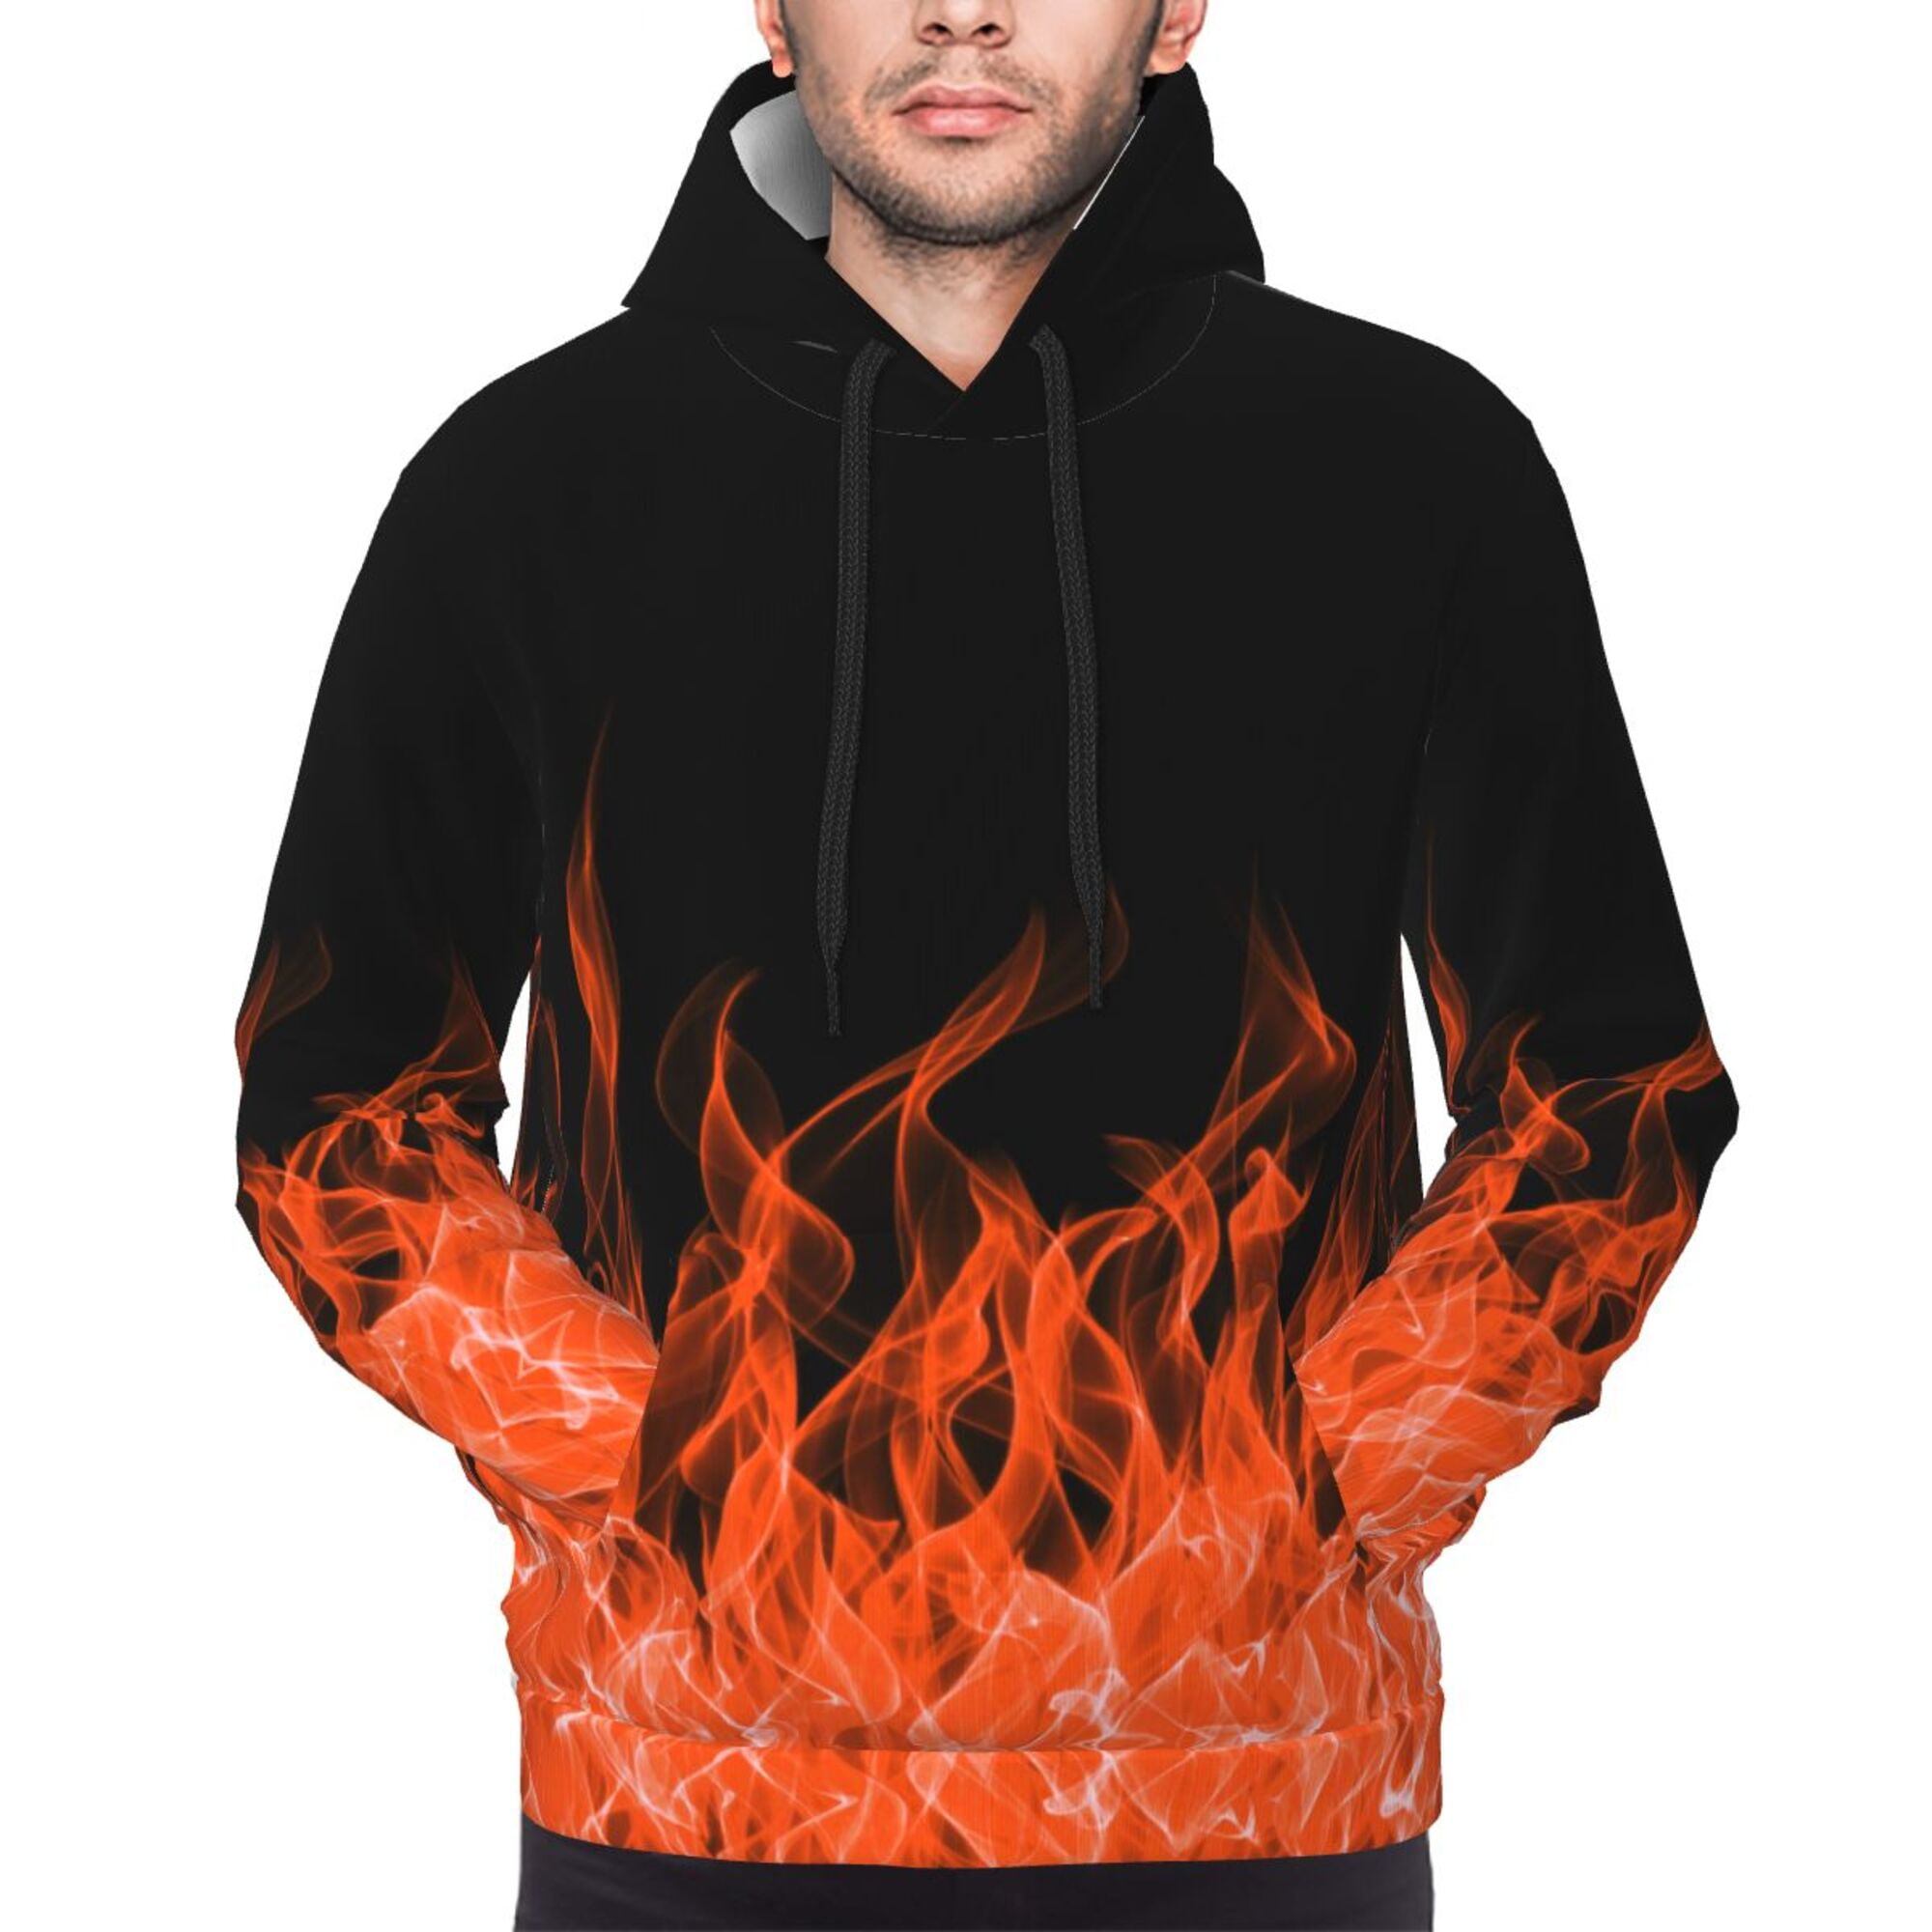  Love Fire Fighter Mens Graphic Hoodies Long Sleeve Sweatshirt  Casual Streetwear Hip-Hop Pullover S : Sports & Outdoors